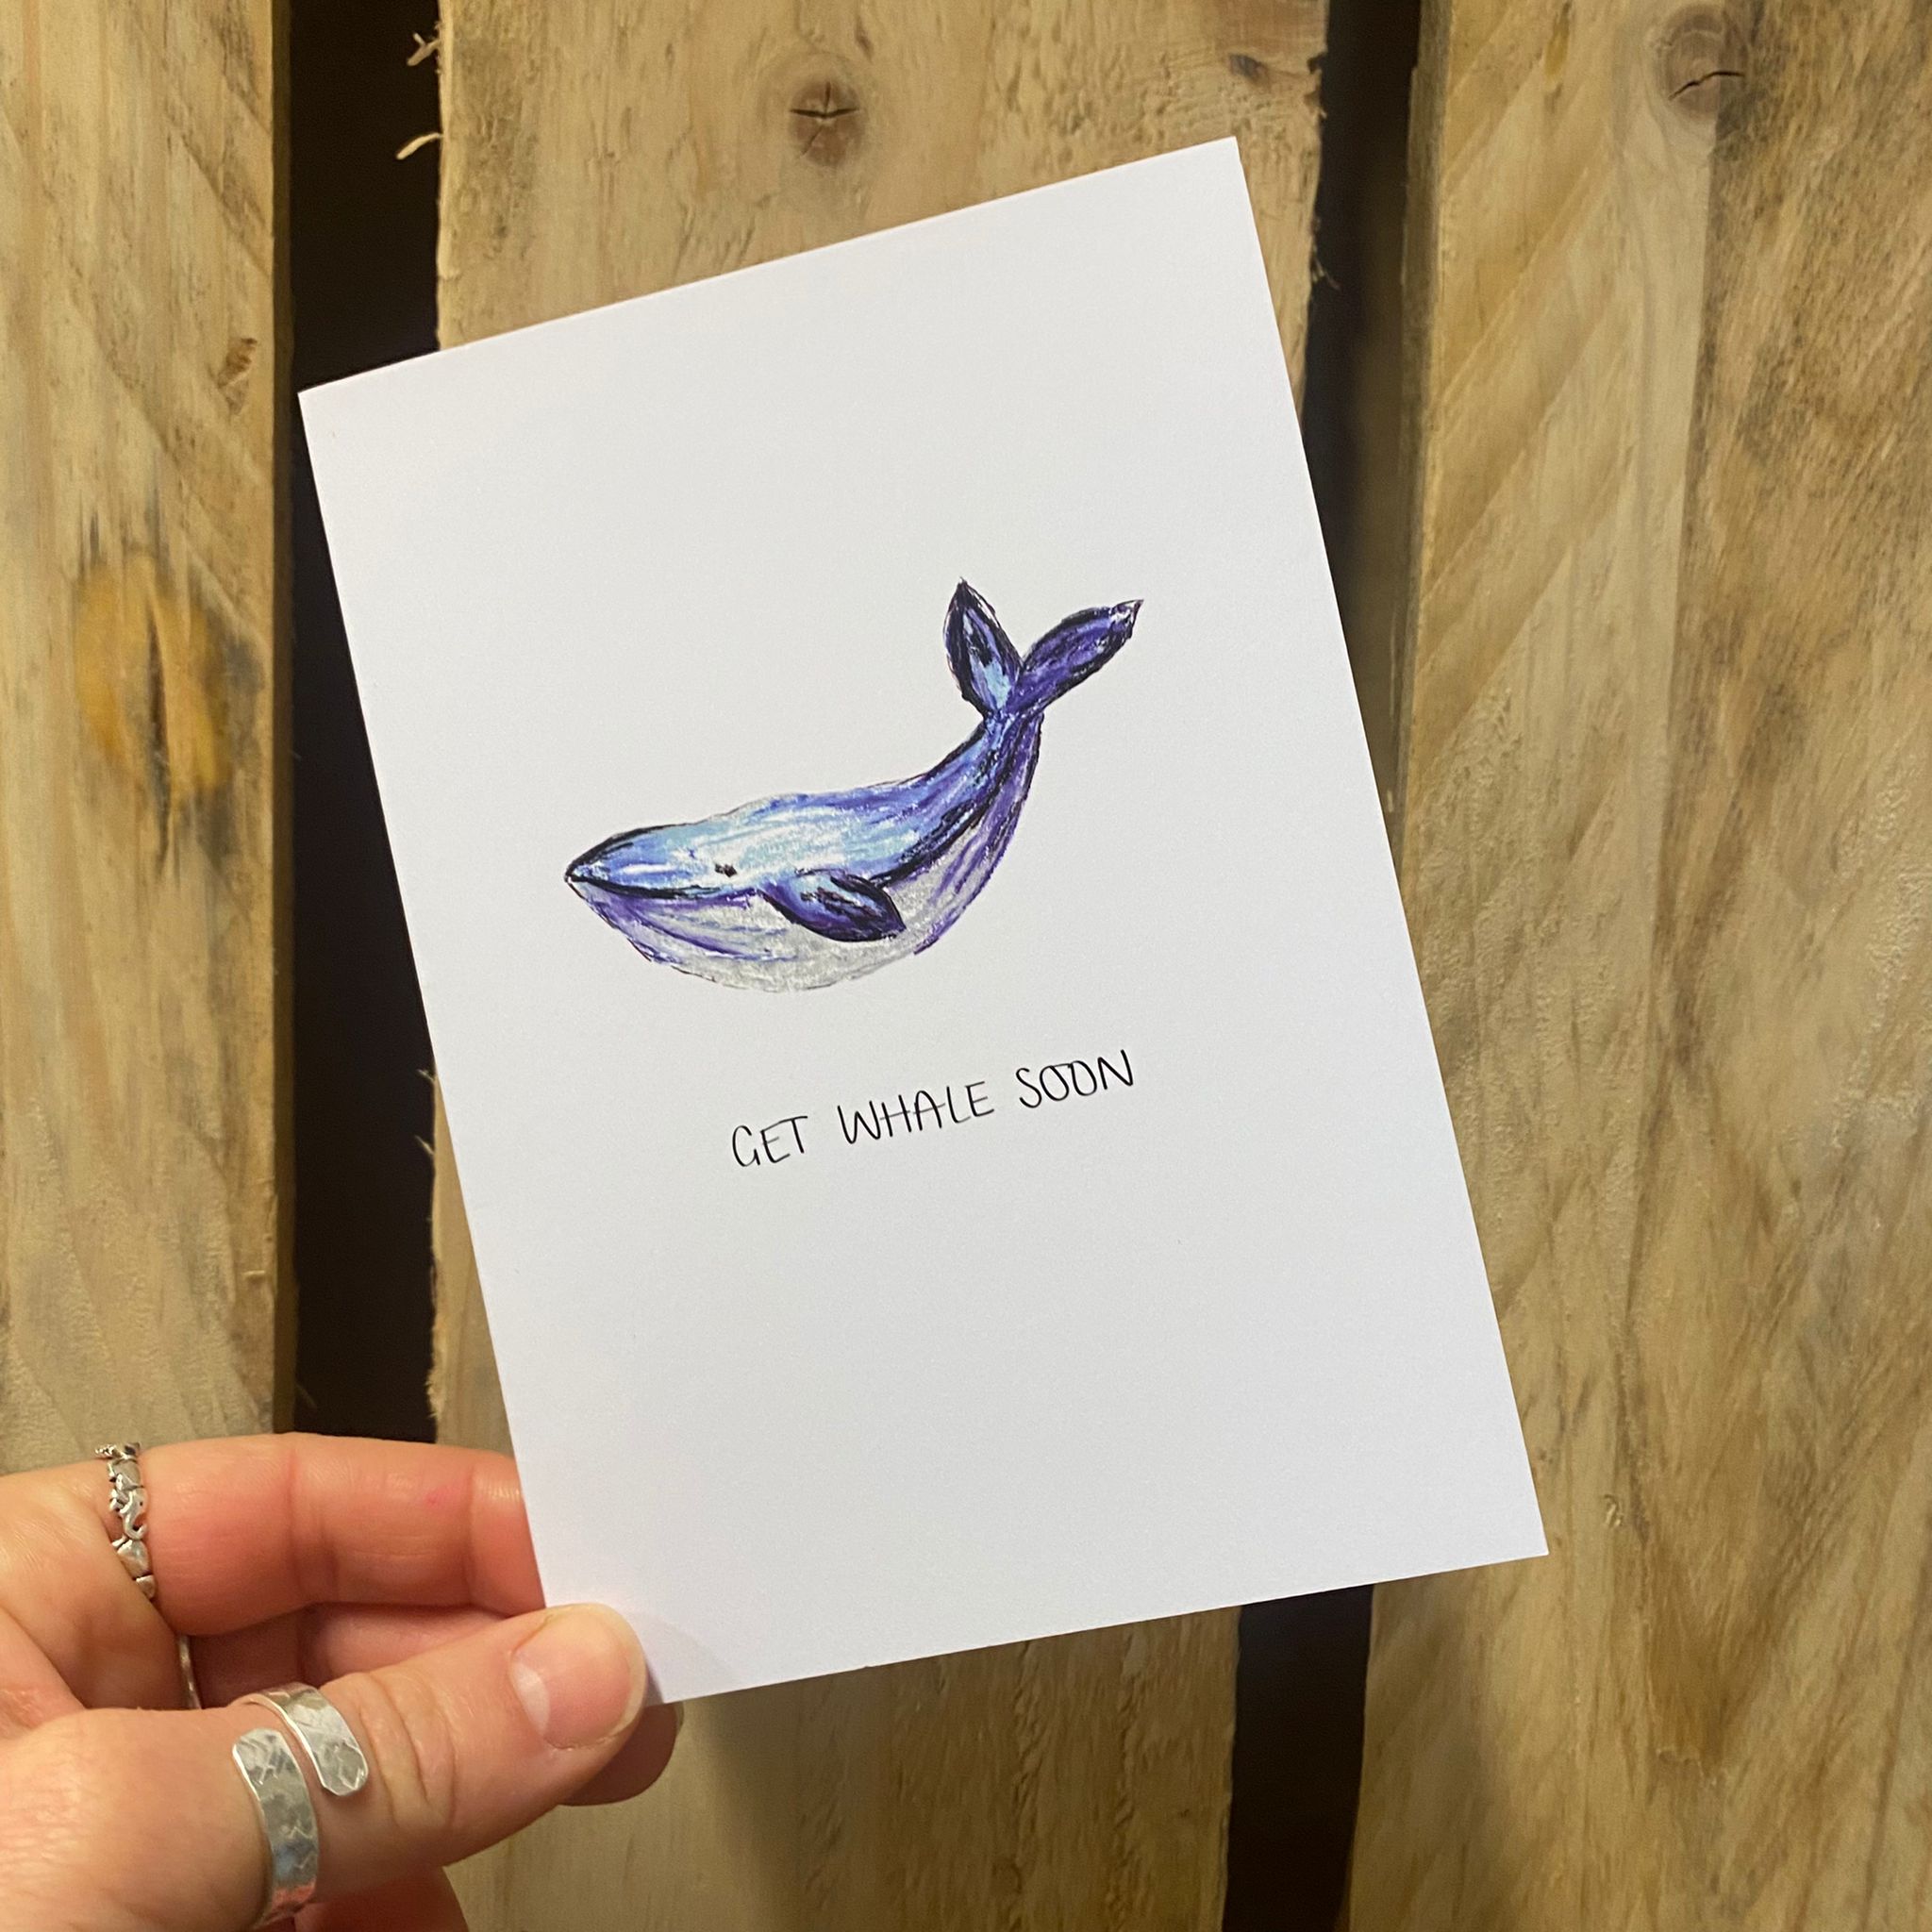 'Get Whale Soon' Recycled Greetings Card